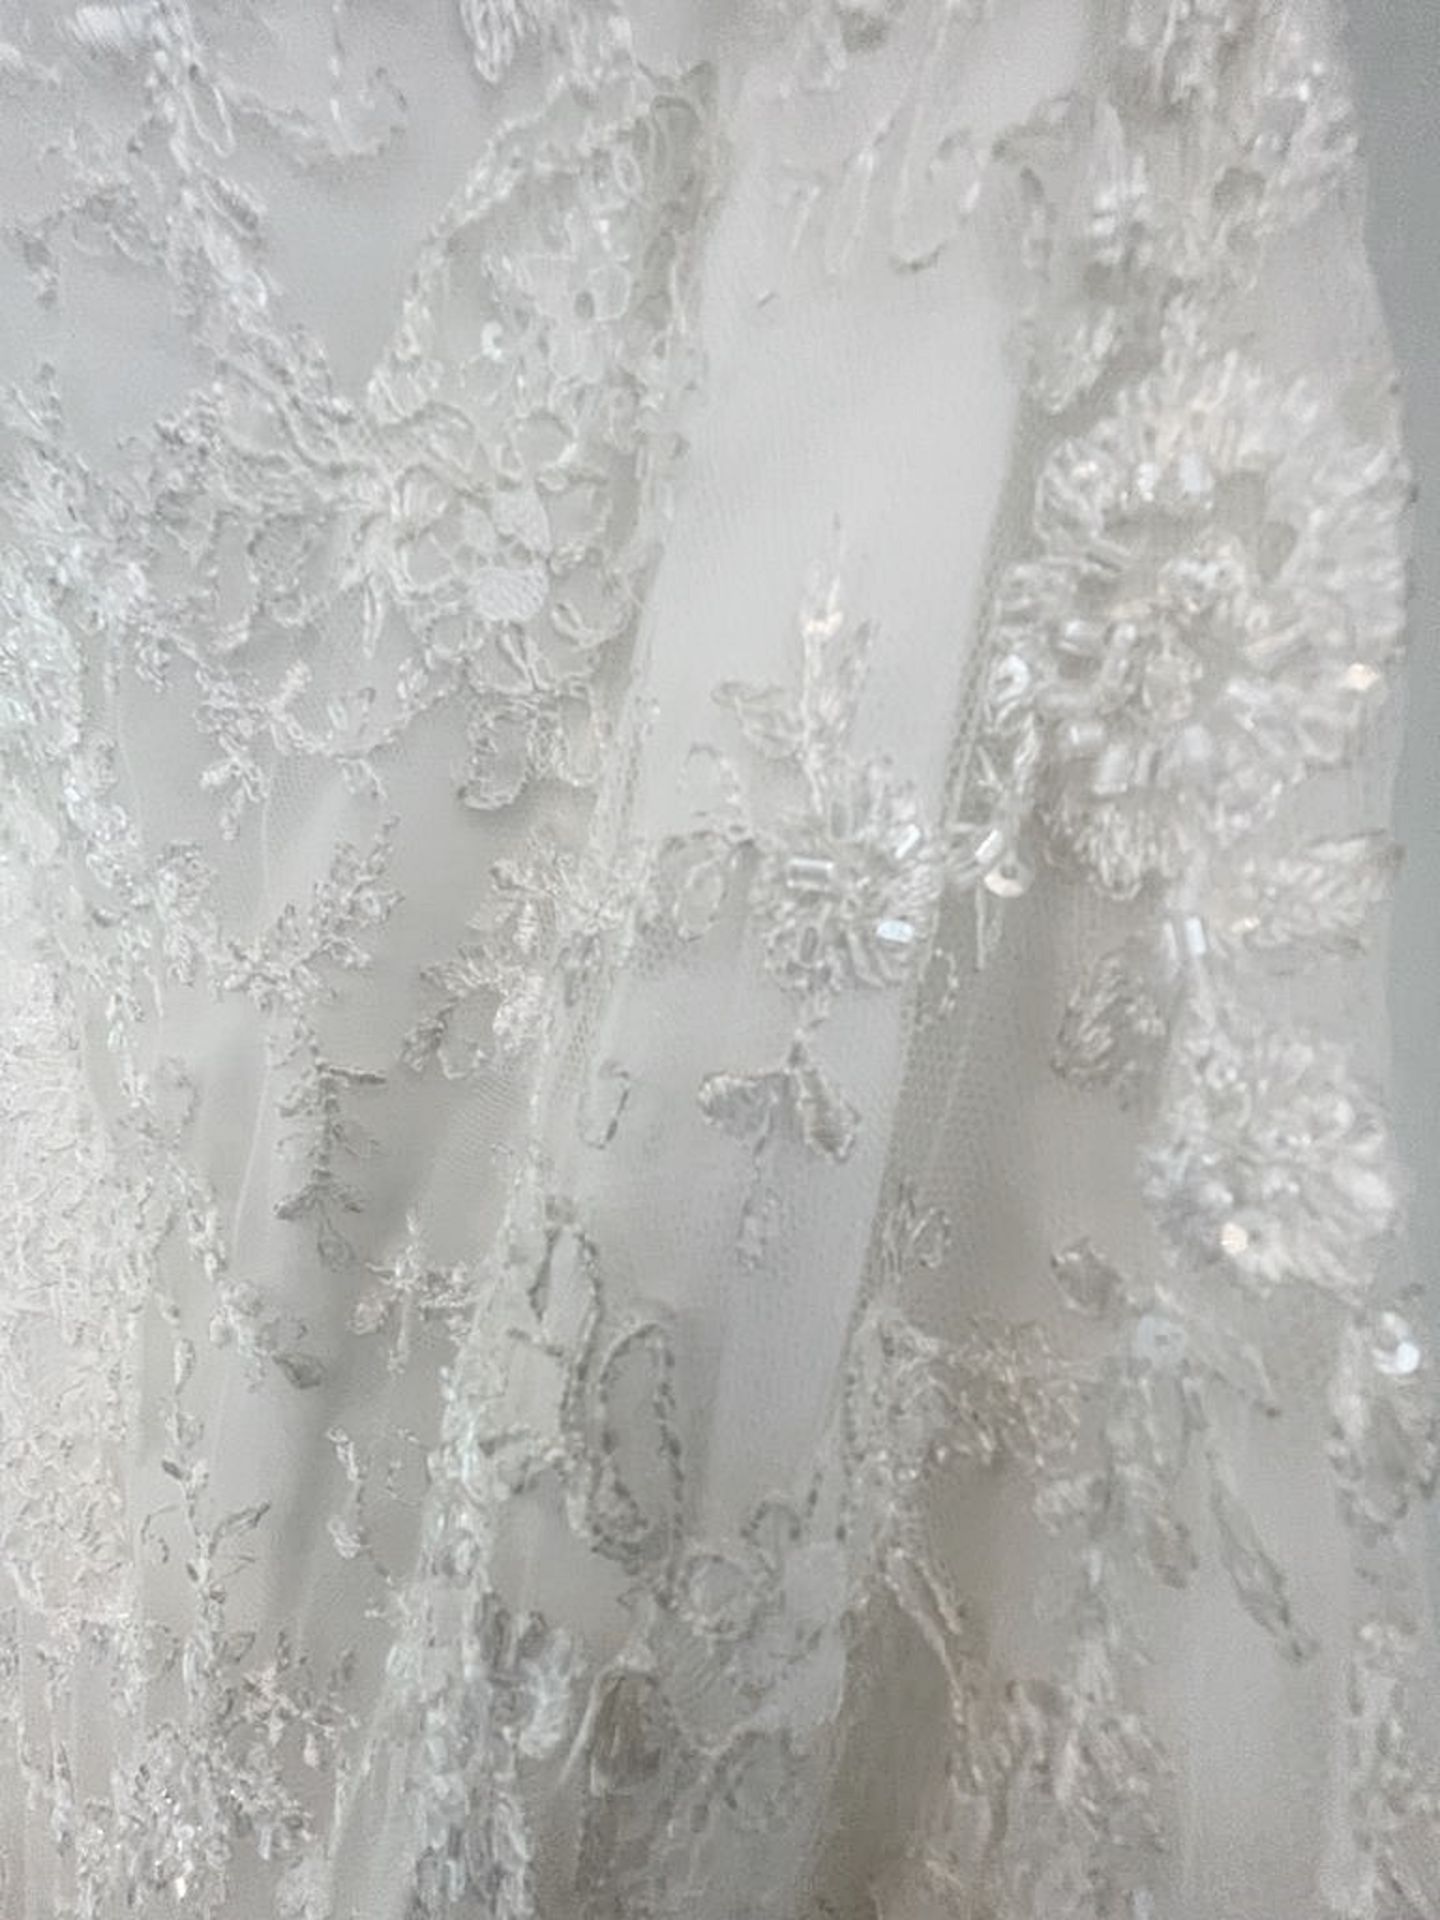 1 x LUSAN MANDONGUS 'Lorelle' Fishtale Designer Wedding Dress Bridal Gown, With Chantilly Lace - Image 11 of 12